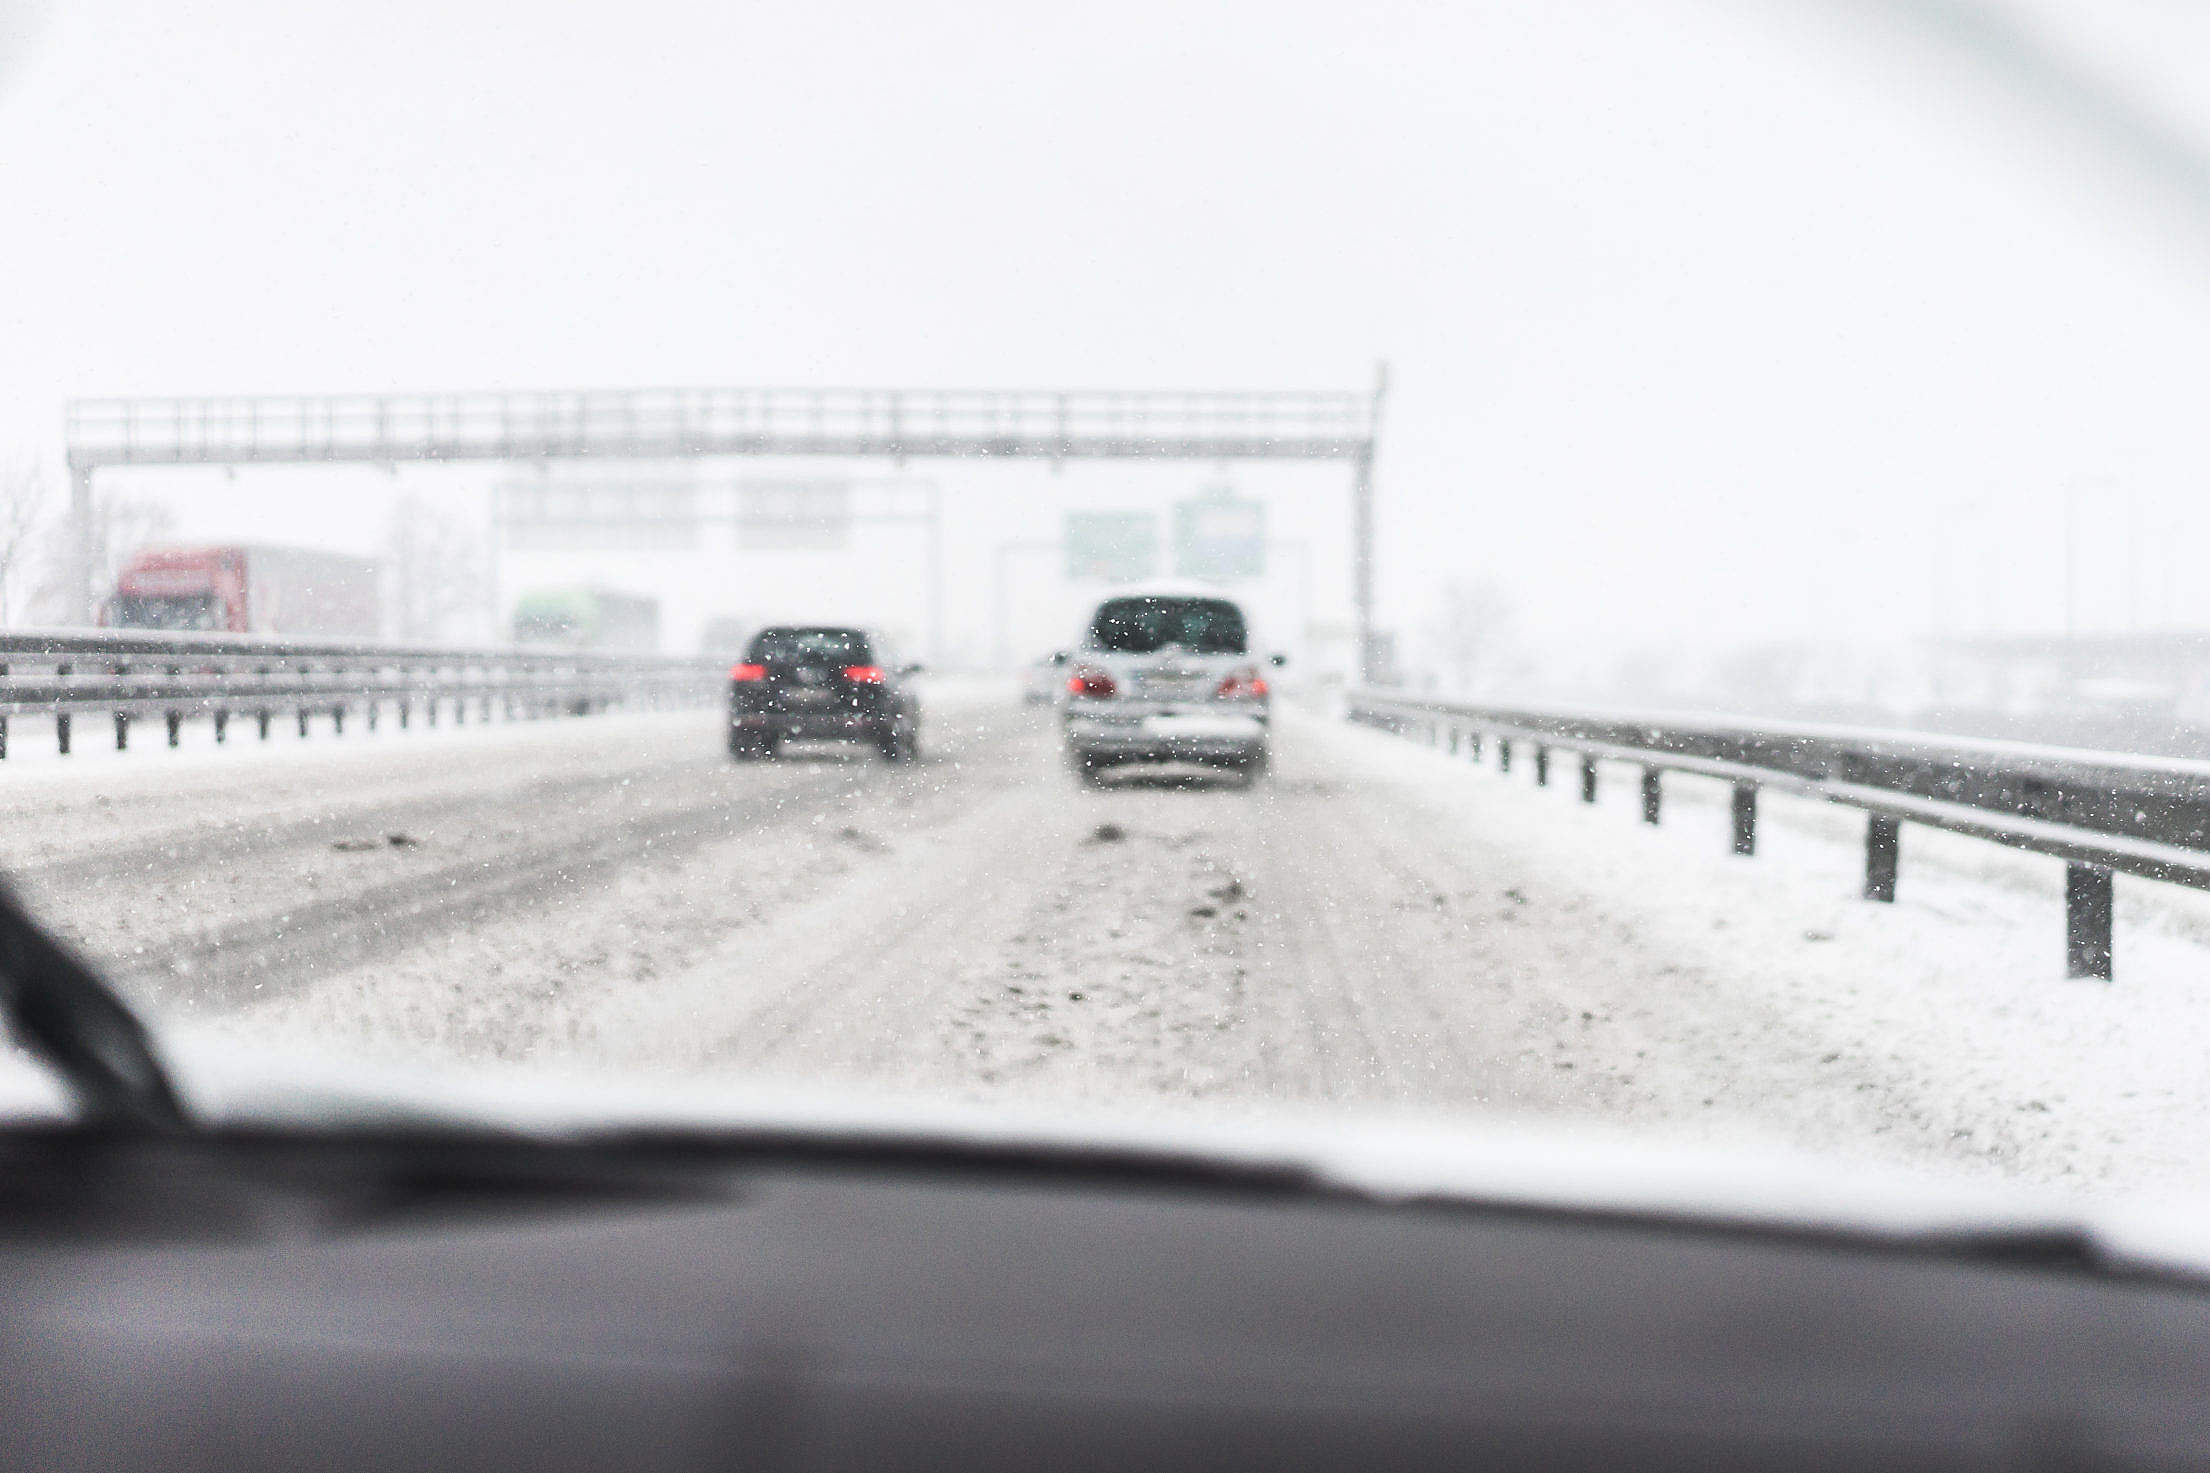 Driving in a Dangerous Snowy Weather on a Highway (focus on snowflakes) Free Stock Photo